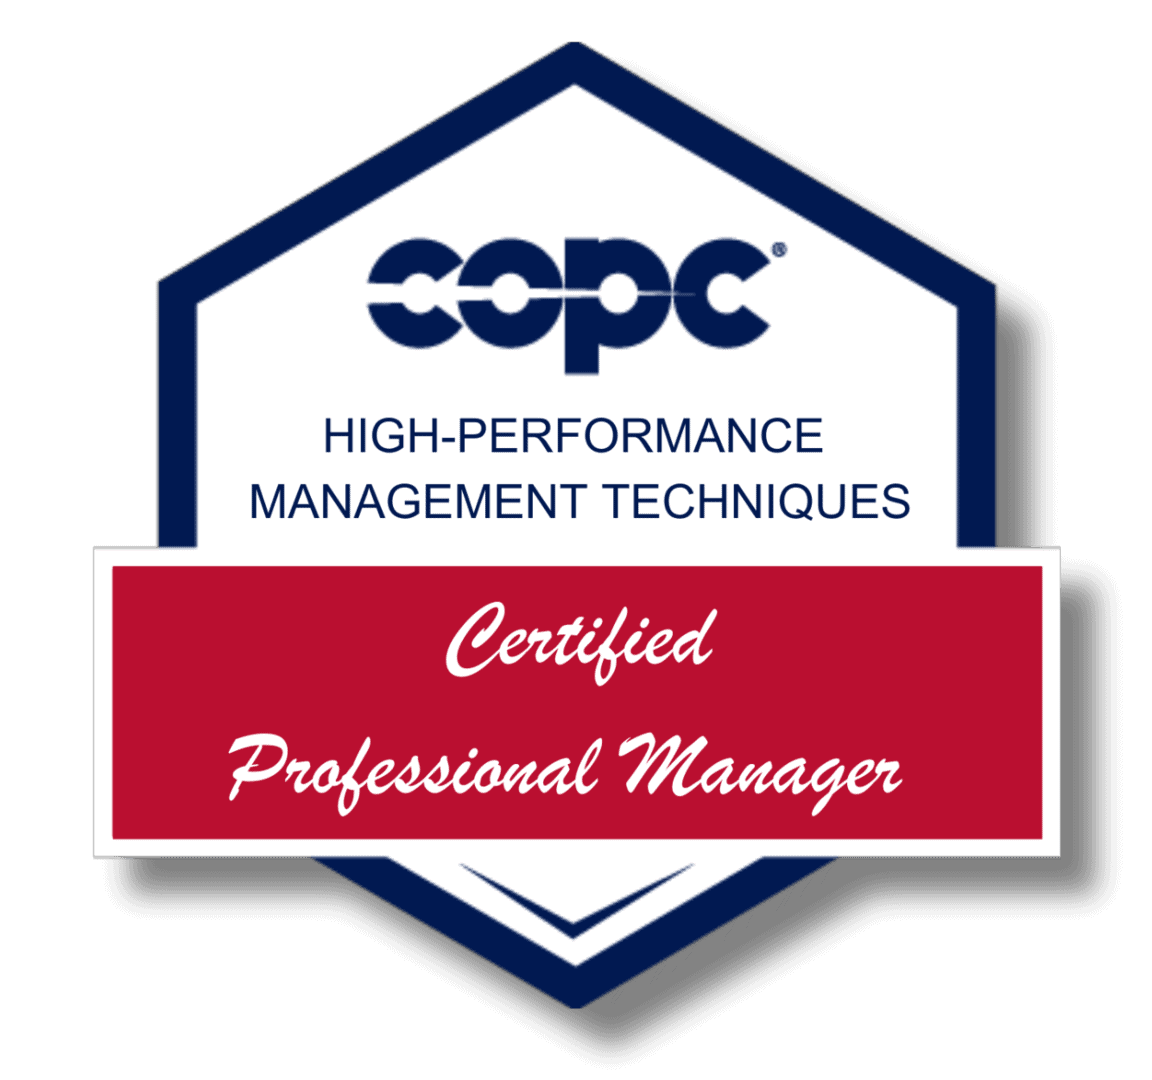 COPC Certification Badge - Certified Professional Manager